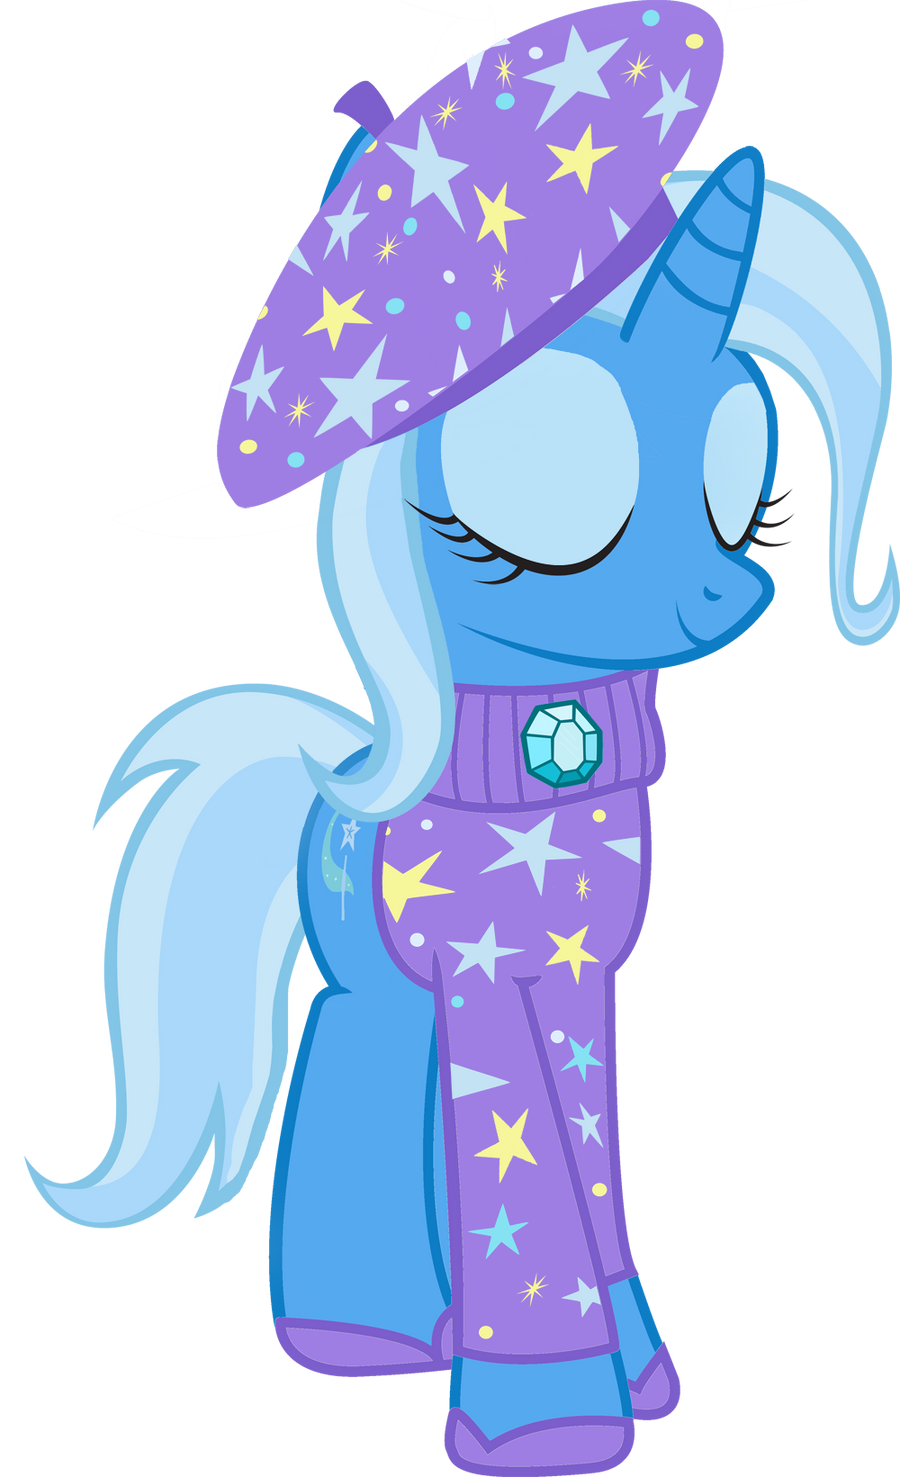 [Bild: french_trixie_by_cool77778-d4ohc6t.png]